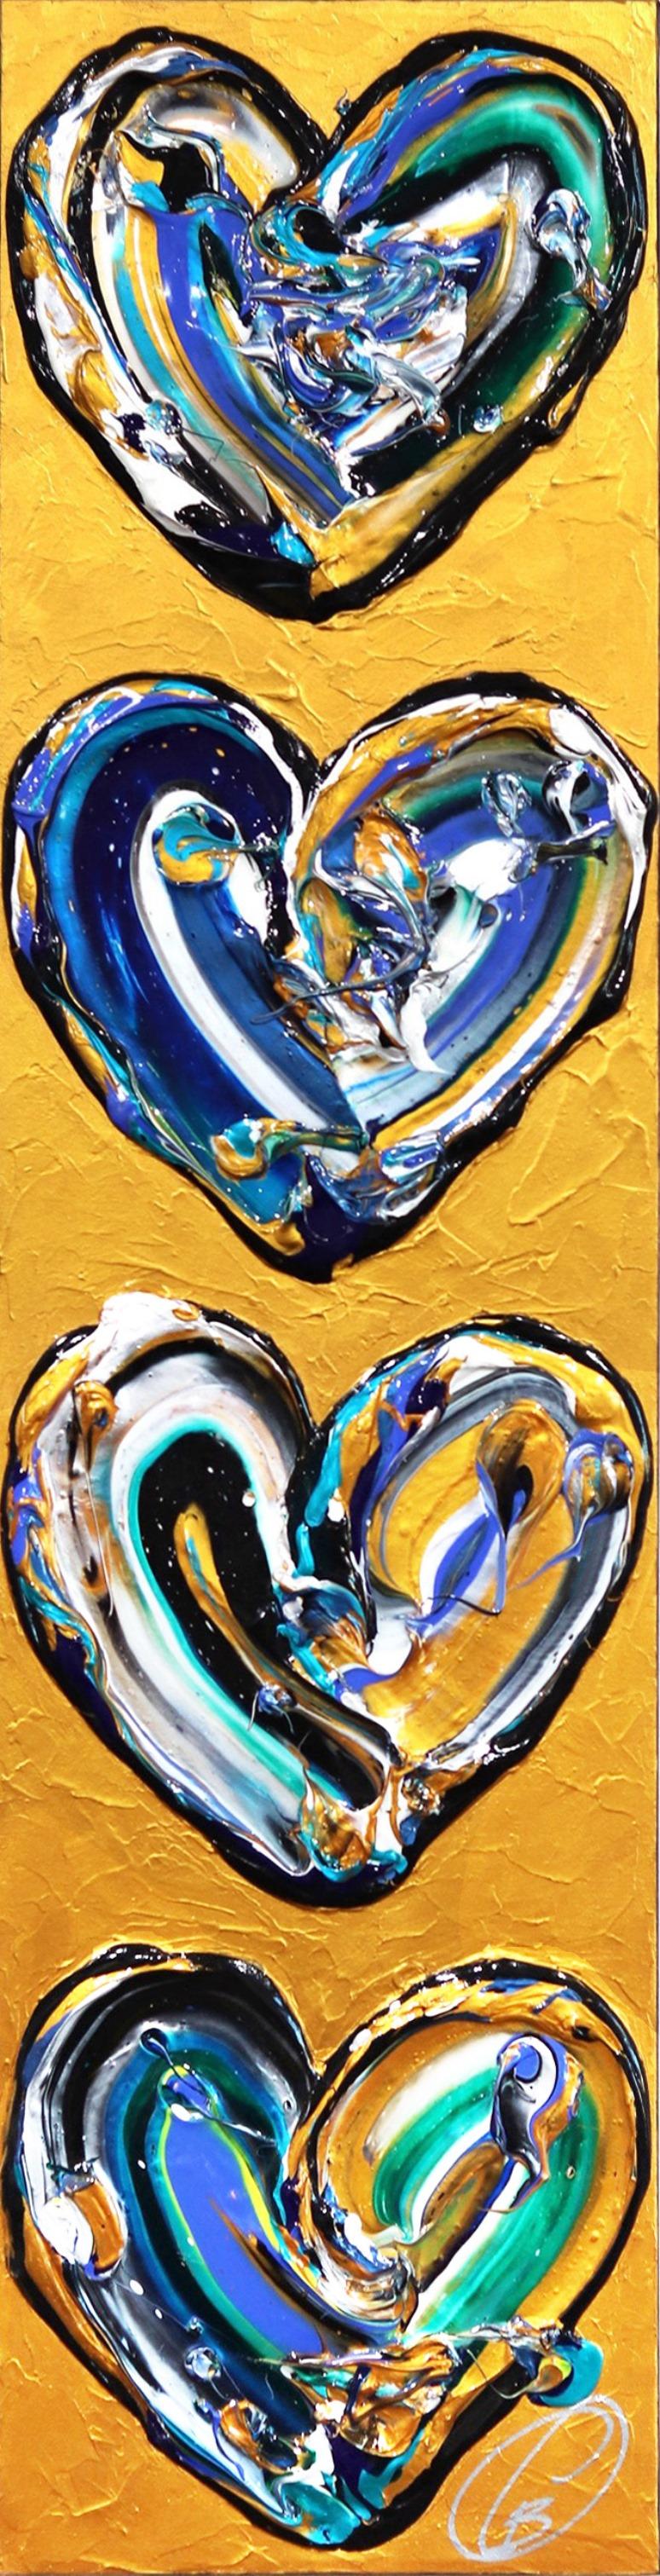 Cynthia Coulombe Bégin Abstract Painting - L'Amour Qui Grandit - Tall Dynamic Textured Hearts Painting on Canvas